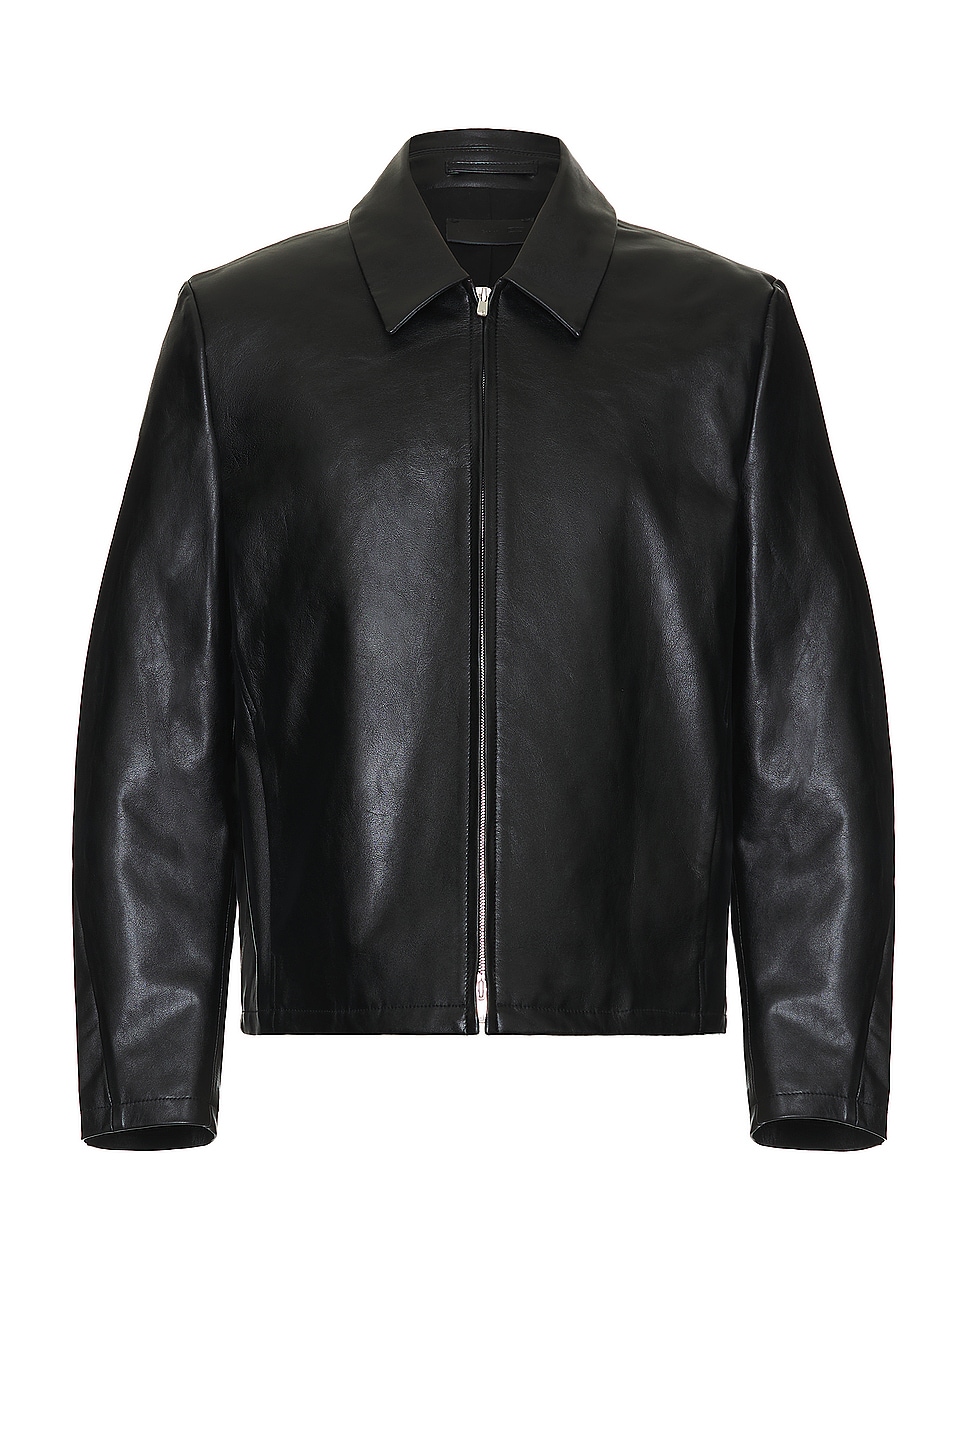 Image 1 of POST ARCHIVE FACTION (PAF) 6.0 Leather Jacket in Black